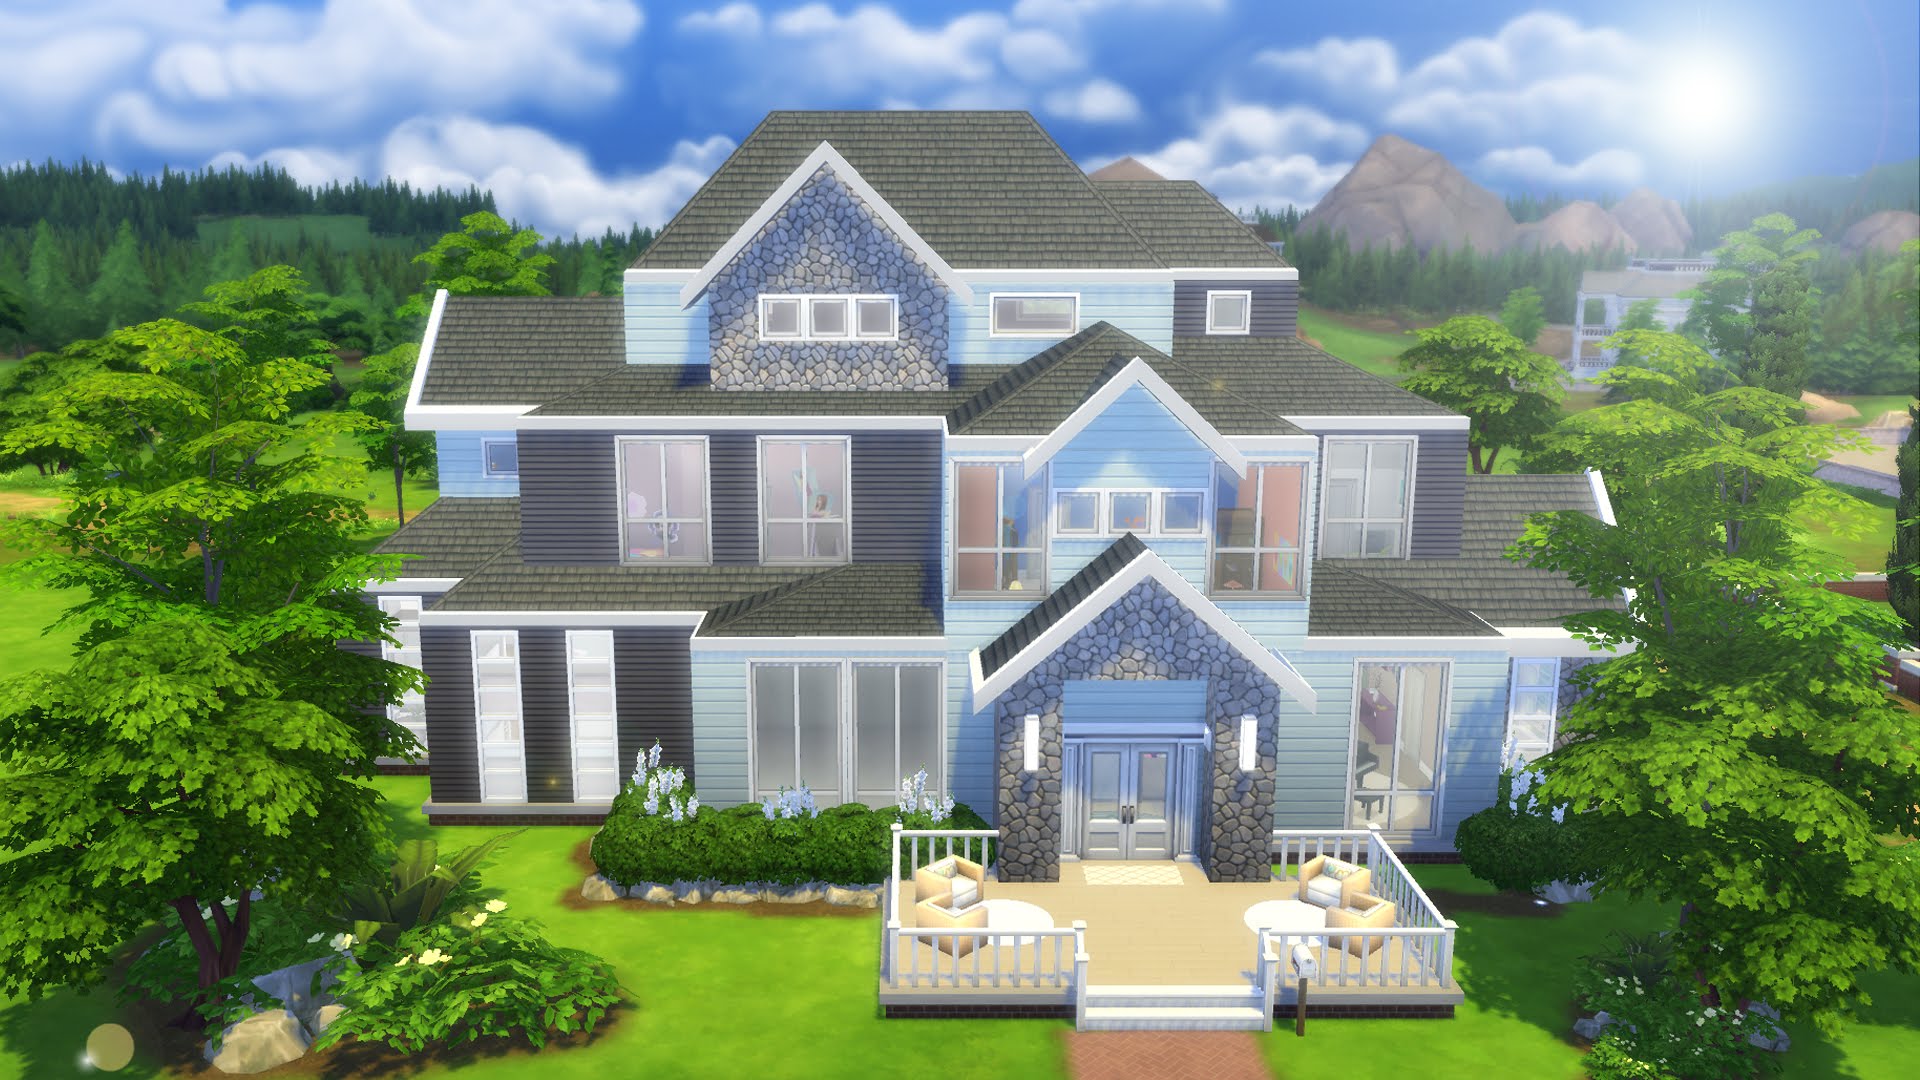 The Sims 4 | Speed Build | Large Family Home - YouTube